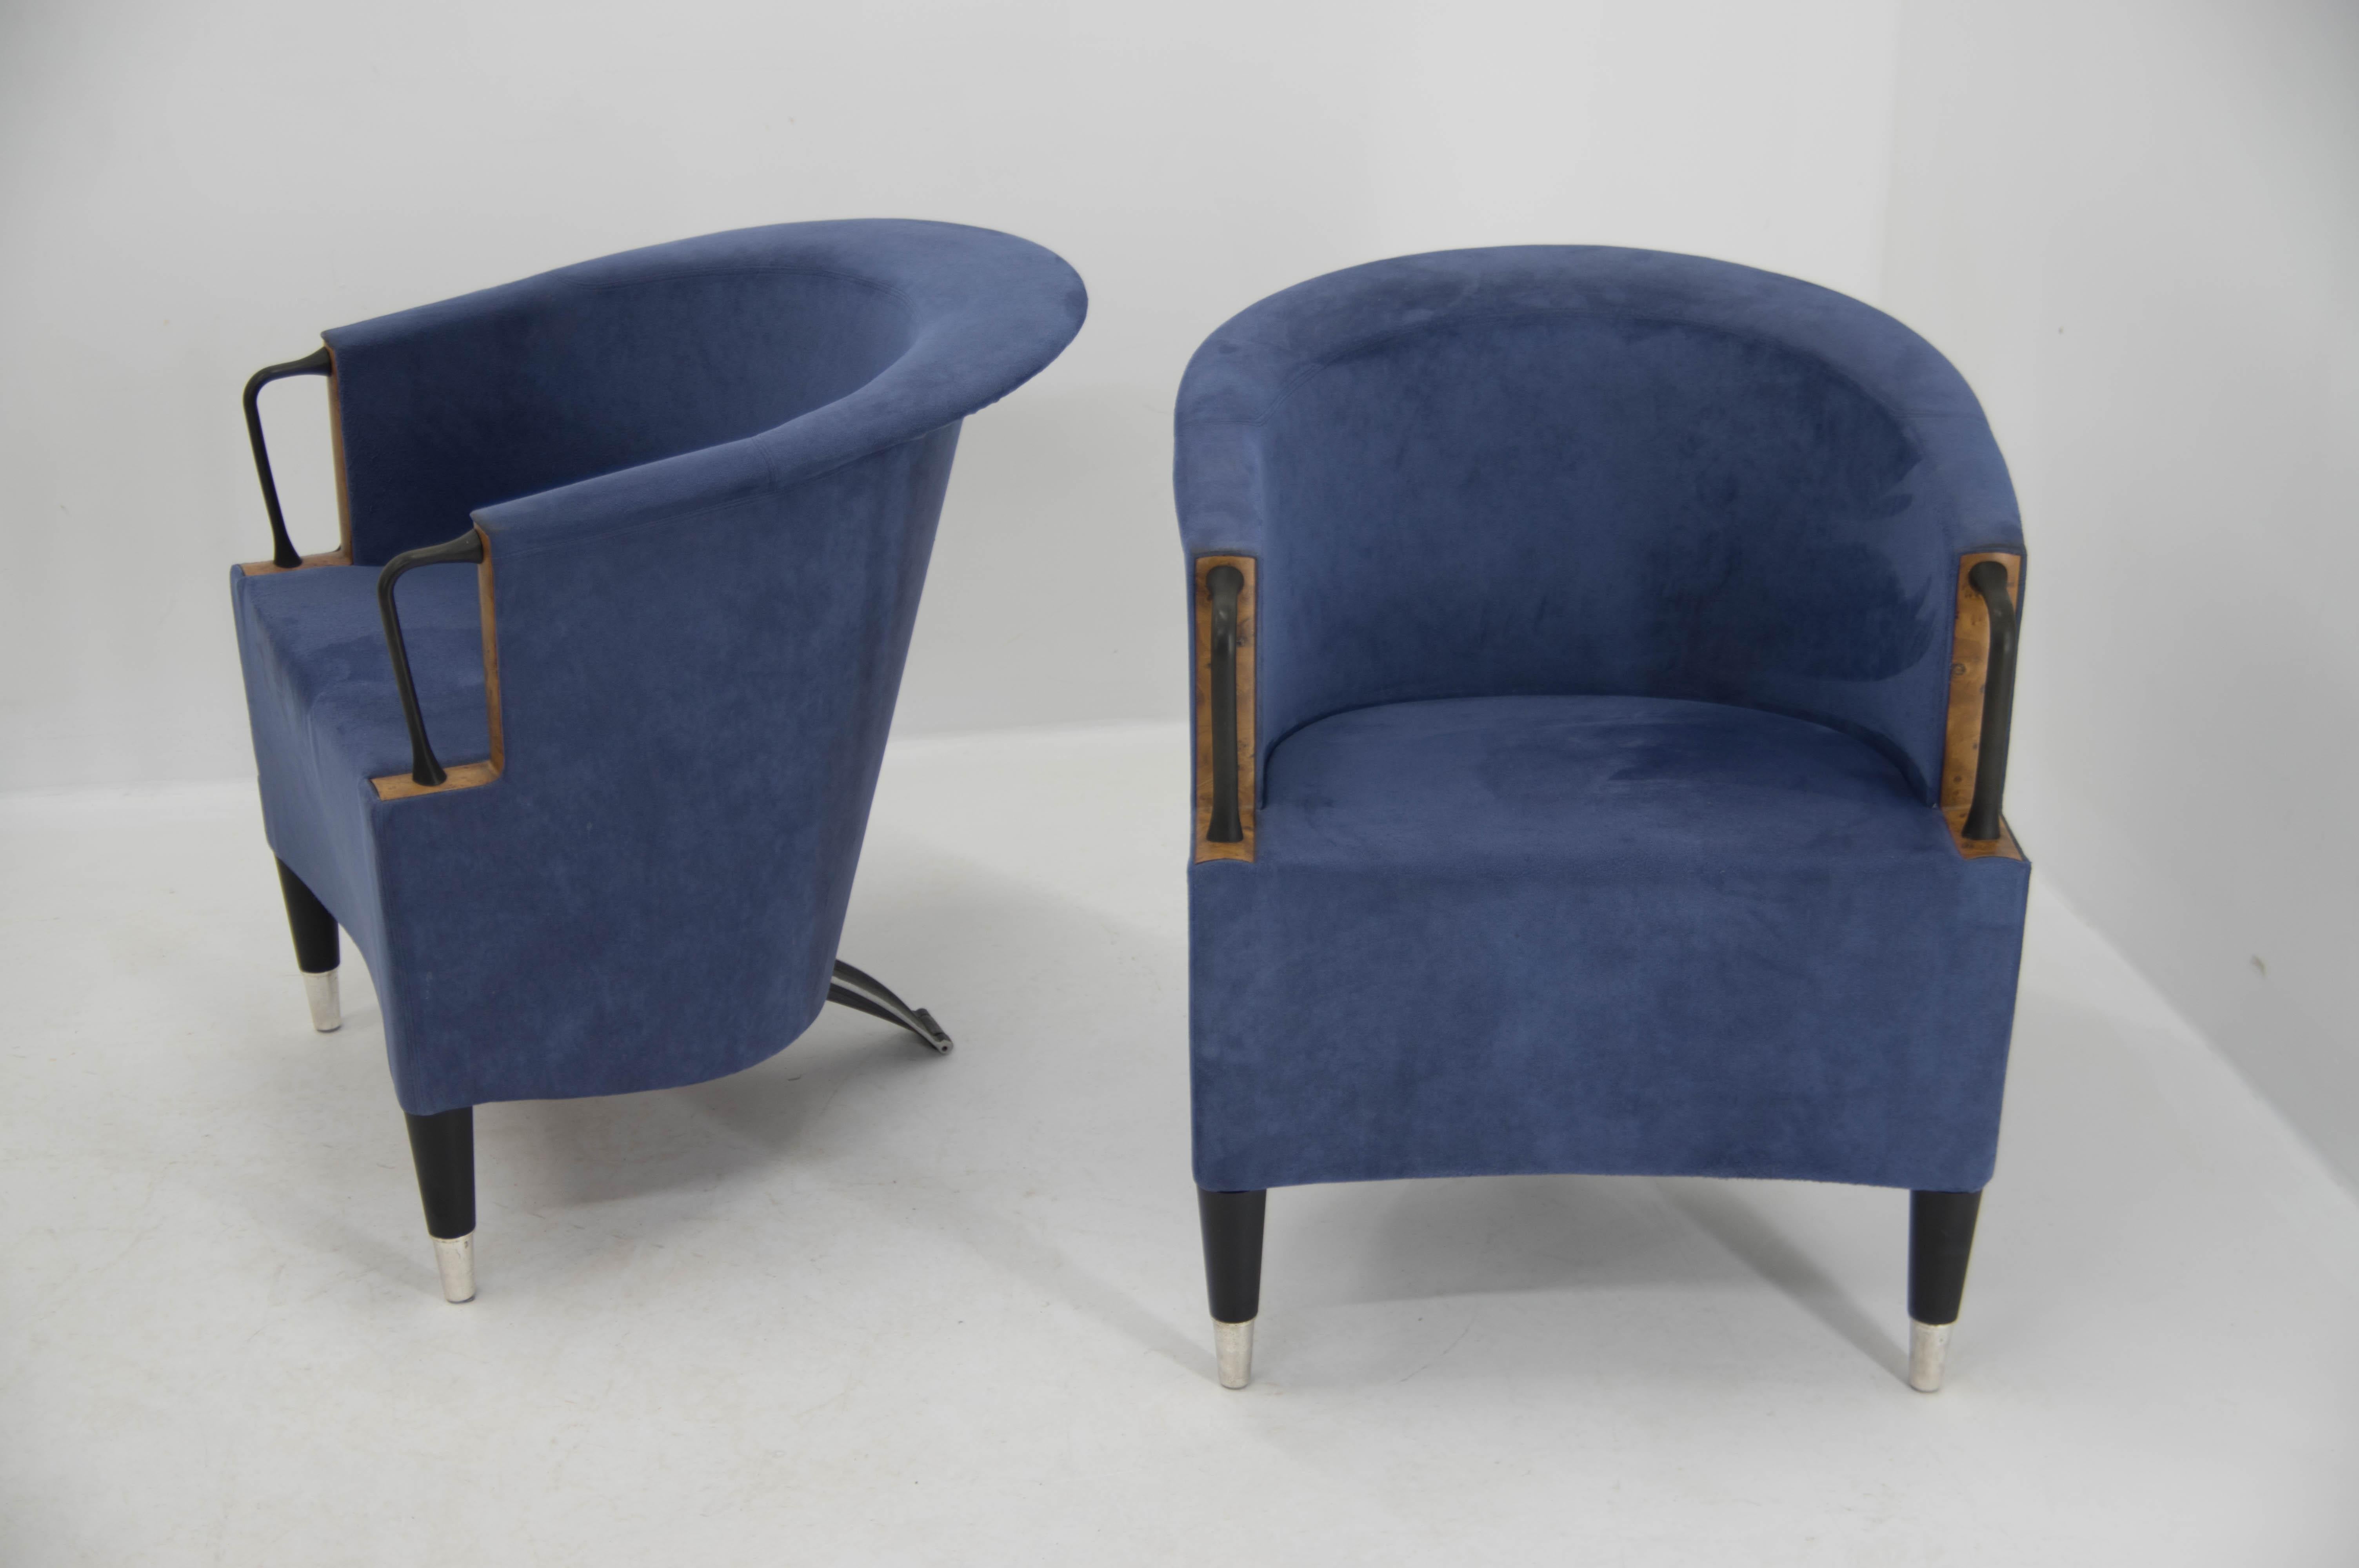 Italian Set of Two Armchairs by Paolo Piva for B&B Italia, 1980s For Sale